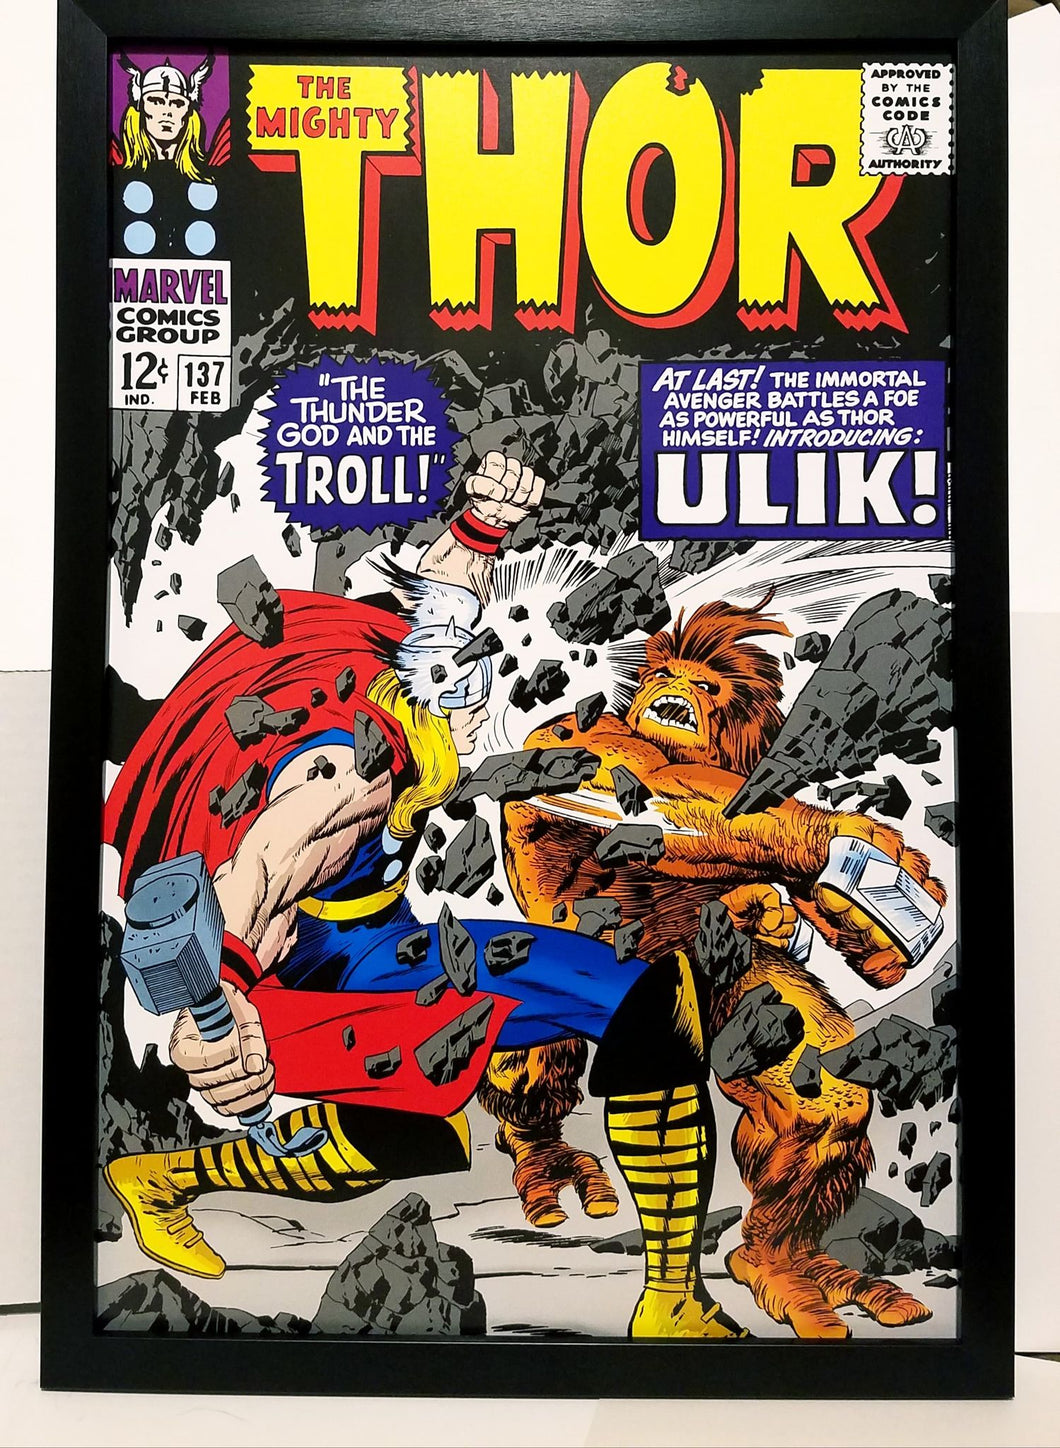 Mighty Thor #137 by Jack Kirby 12x18 FRAMED Marvel Comics Vintage Art Print Poster